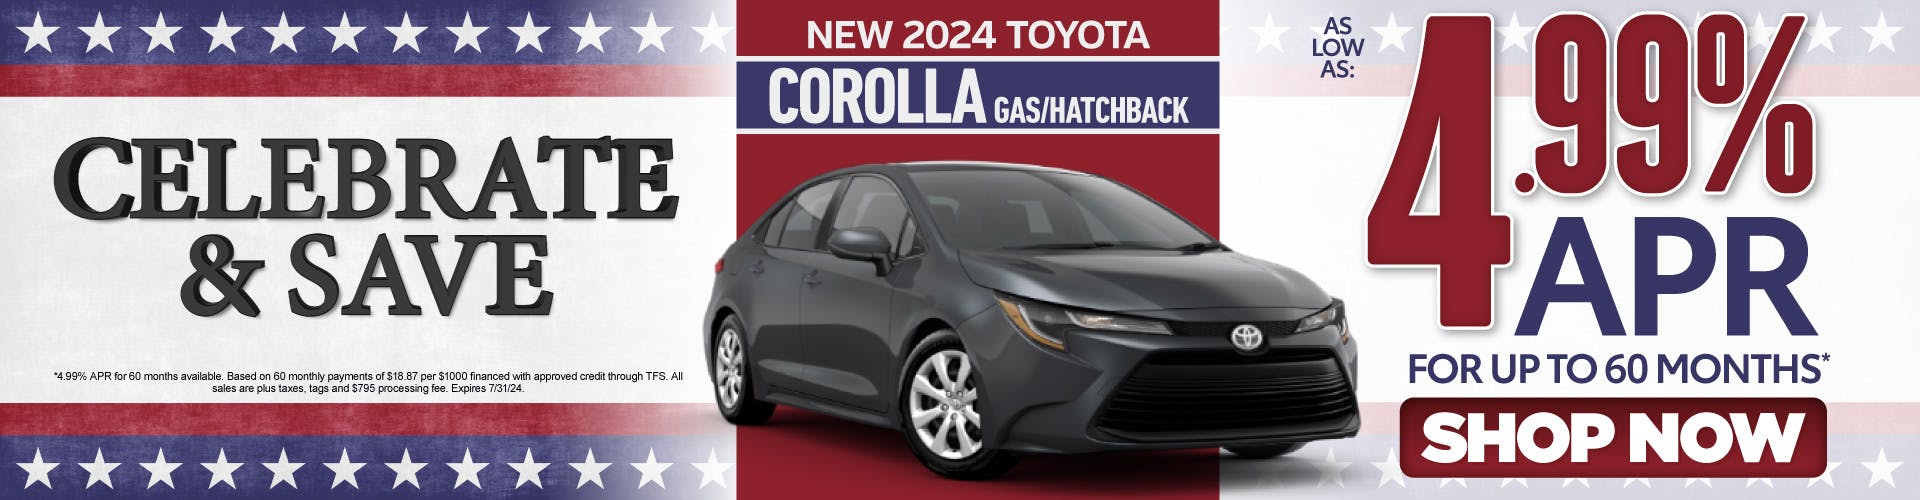 New 2024 Toyota Corolla Gas/Hatchback – As Low as 4.99% APR for up to 60 months* – Act Now